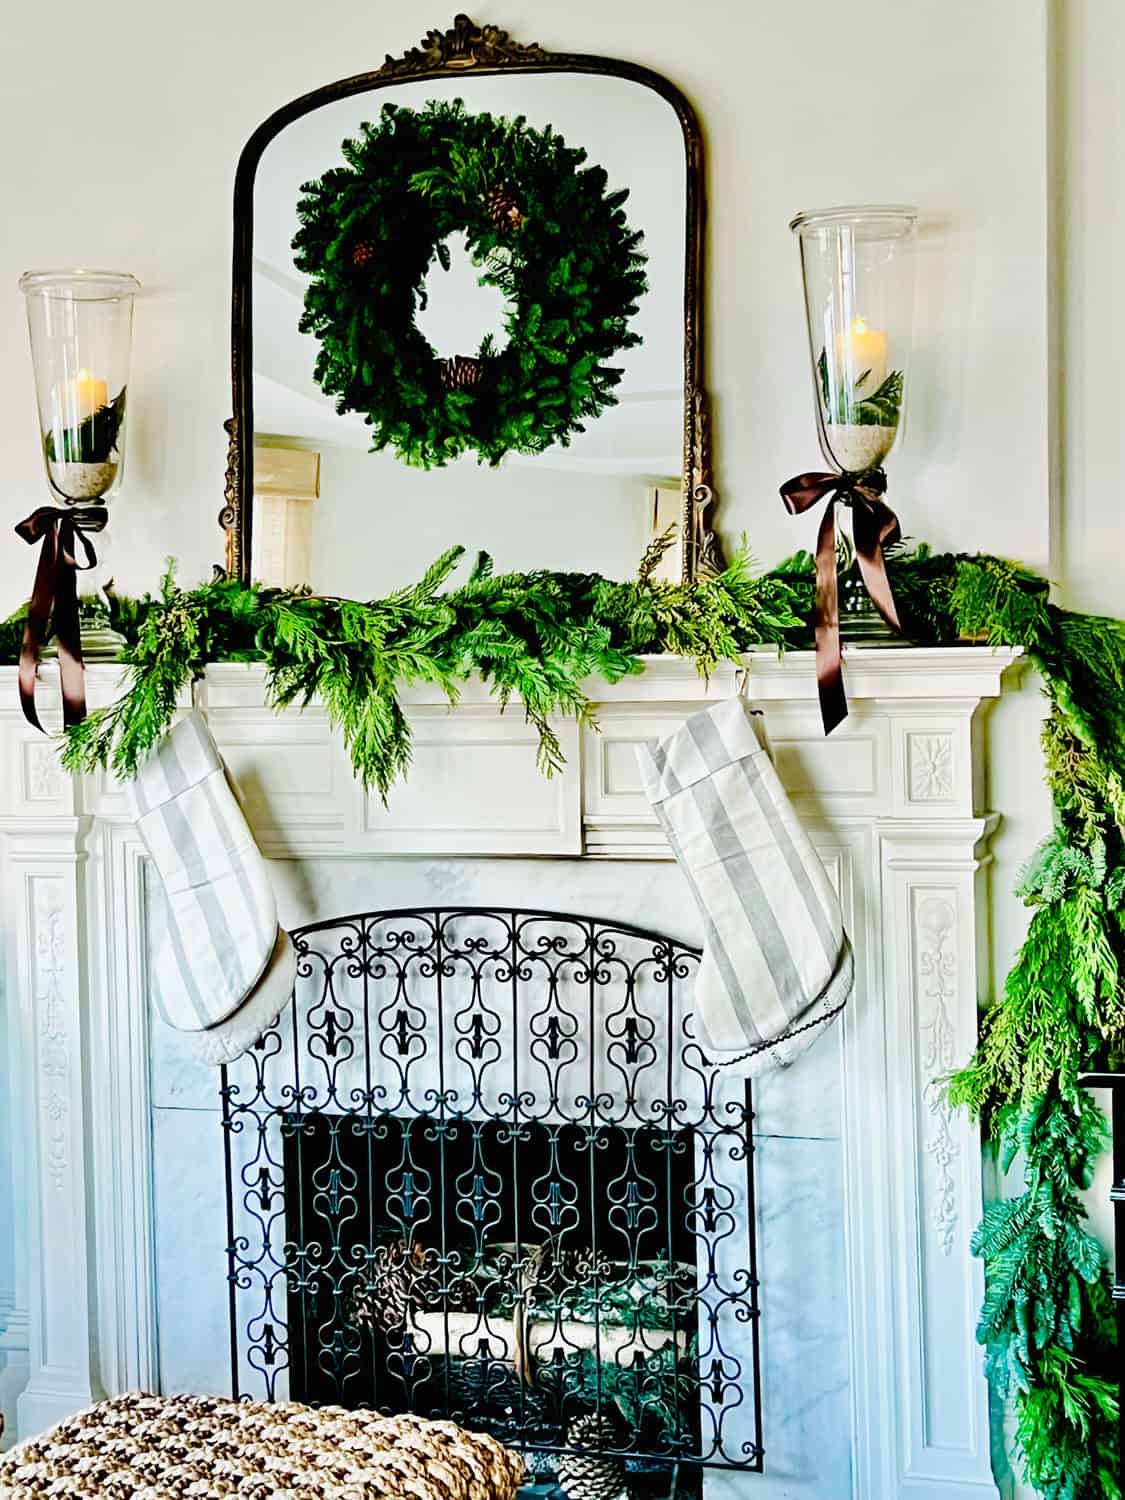 Simply Natural Holiday Décor On the Mantel